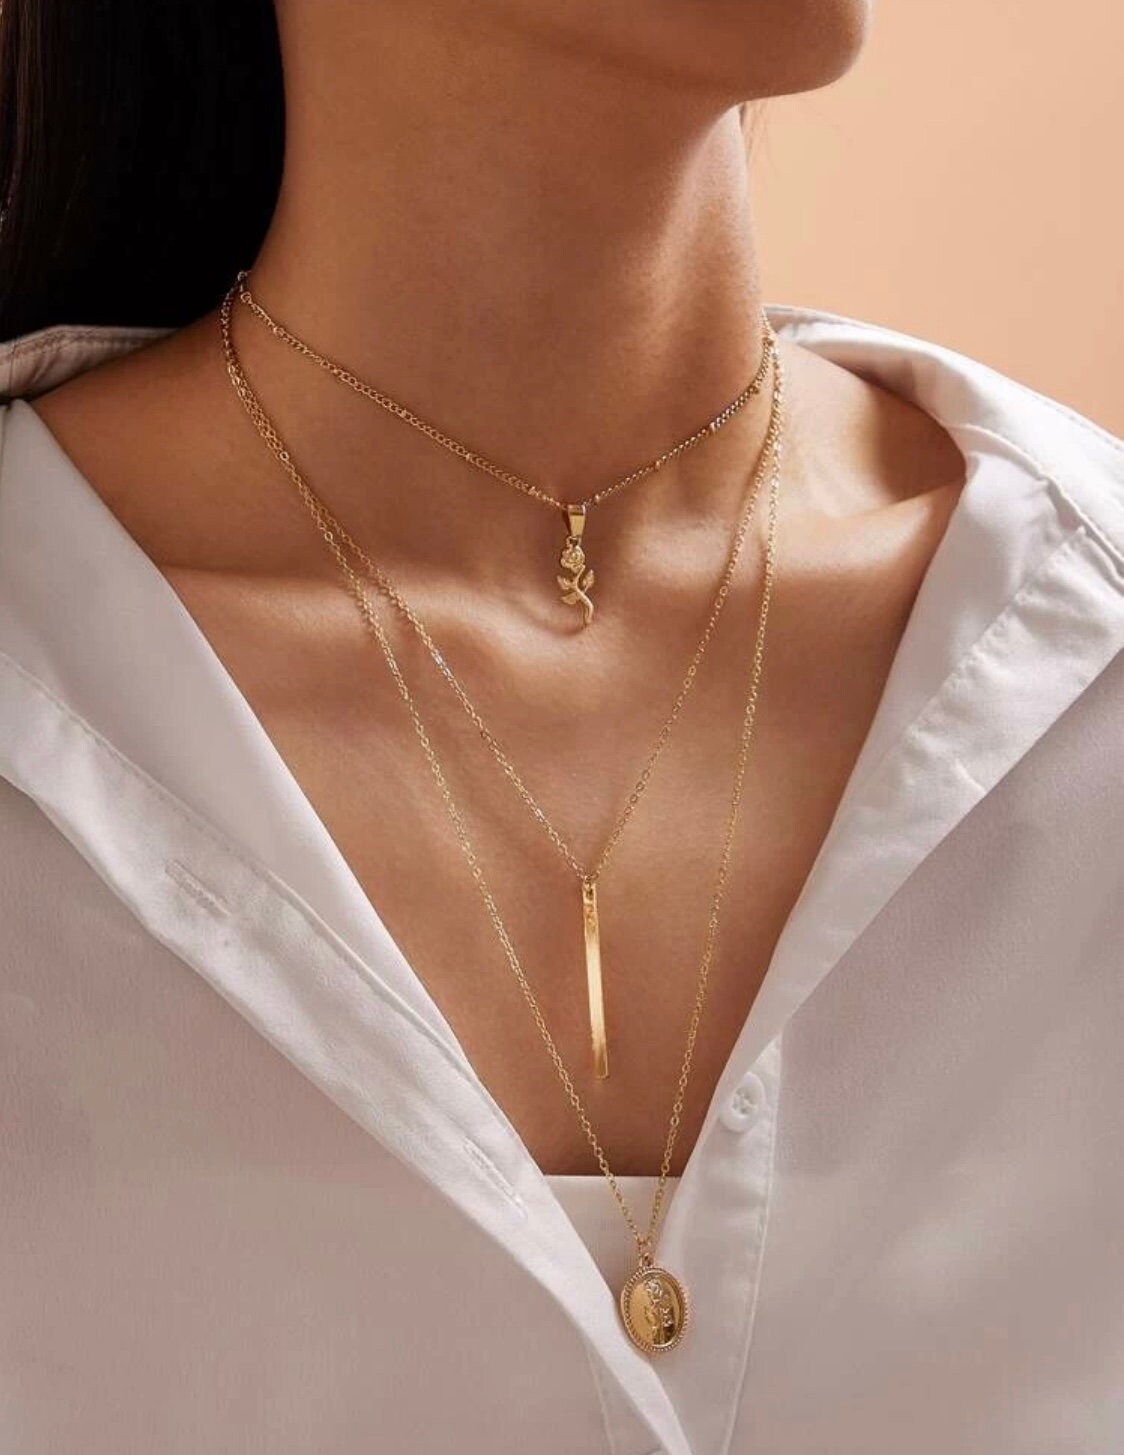 Layered Necklace Spacer Clasp, Gold, Silver or Rose Gold, No More Tangle,  No More Mess. Detangling, Detangled, Layering Magic 